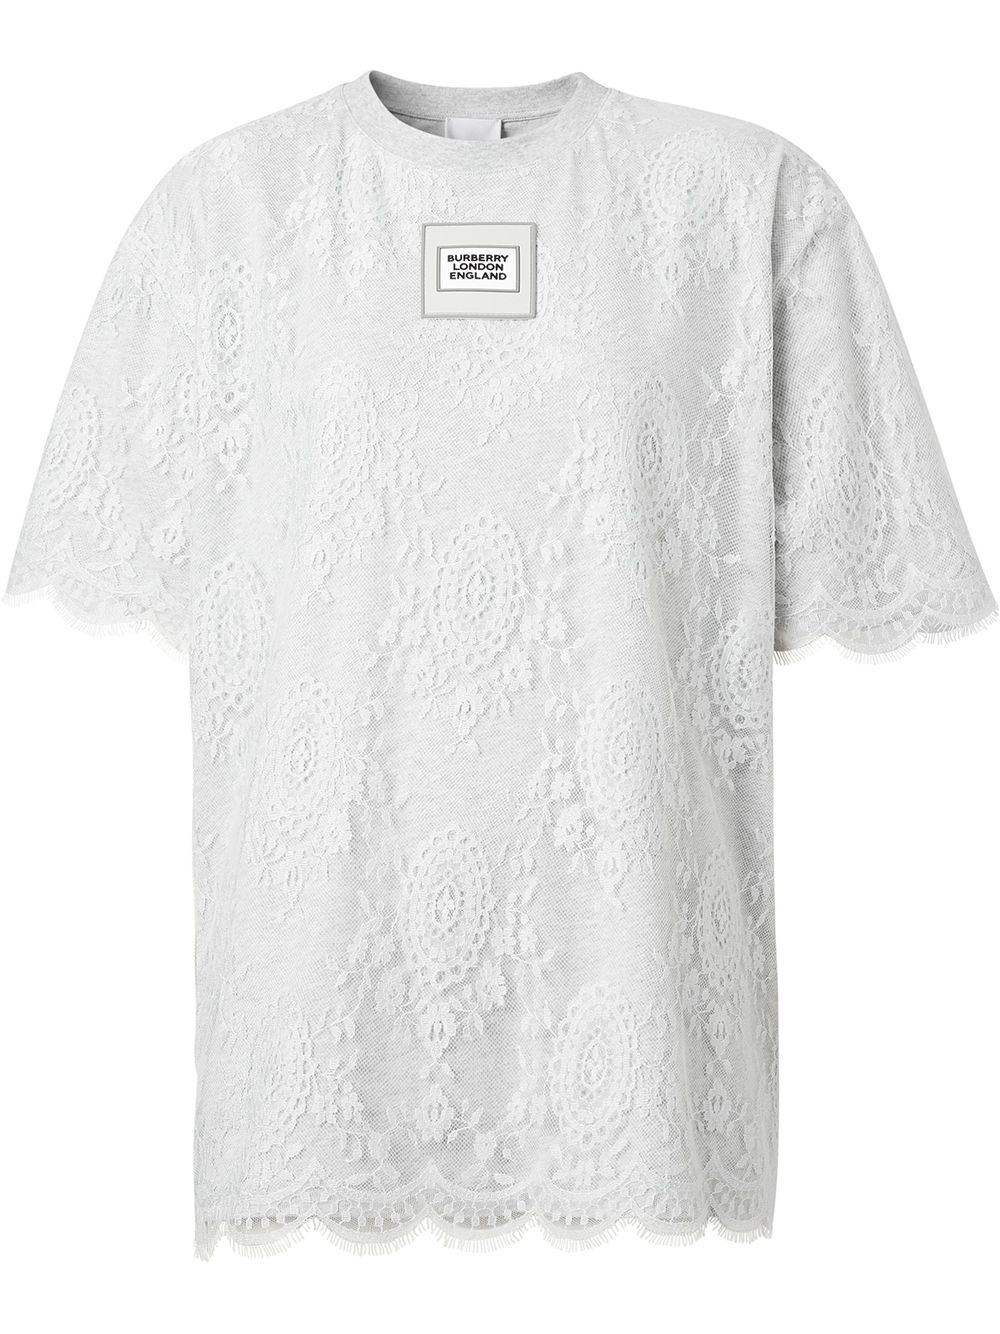 Burberry Lace Overlay T-Shirt Ss20 